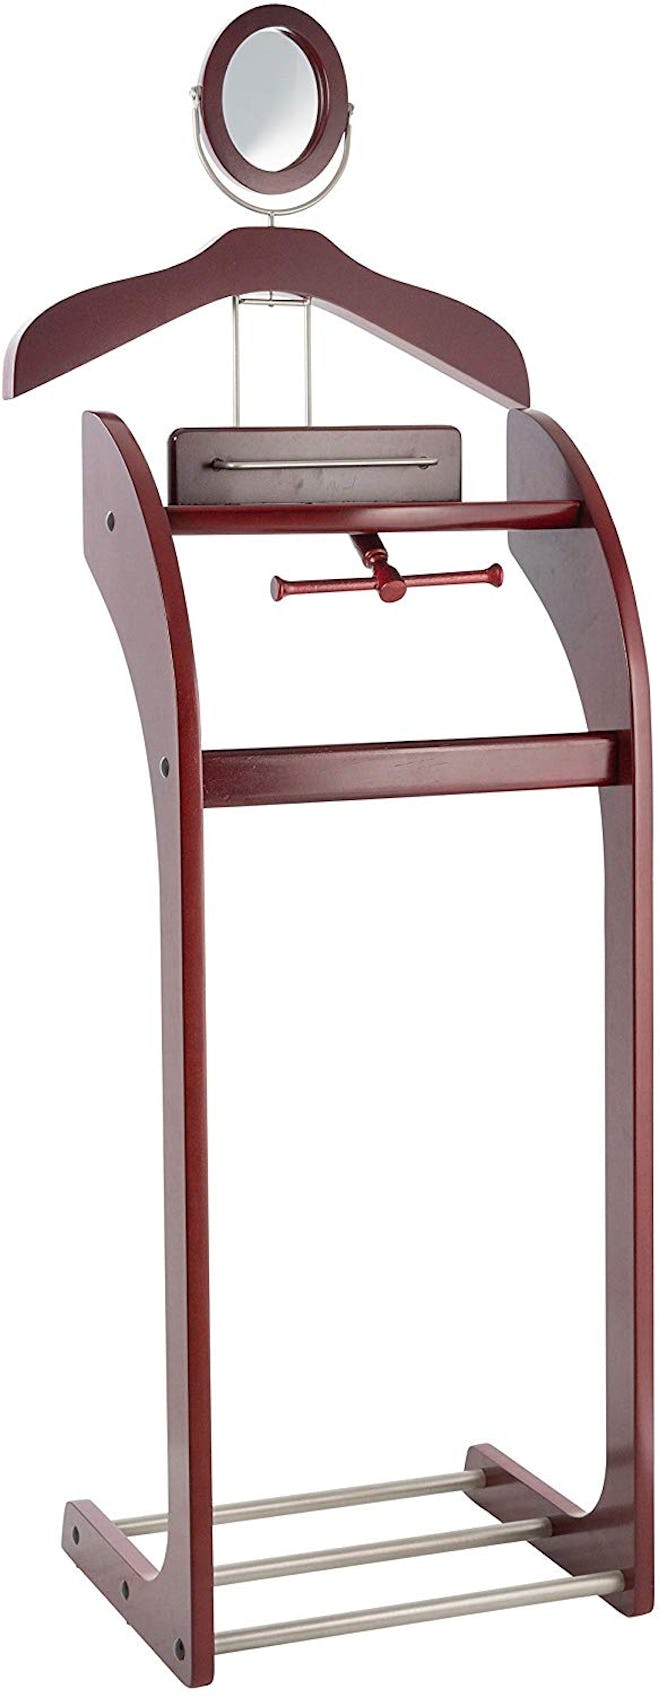 StorageMaid Clothes Valet Stand With Mirror